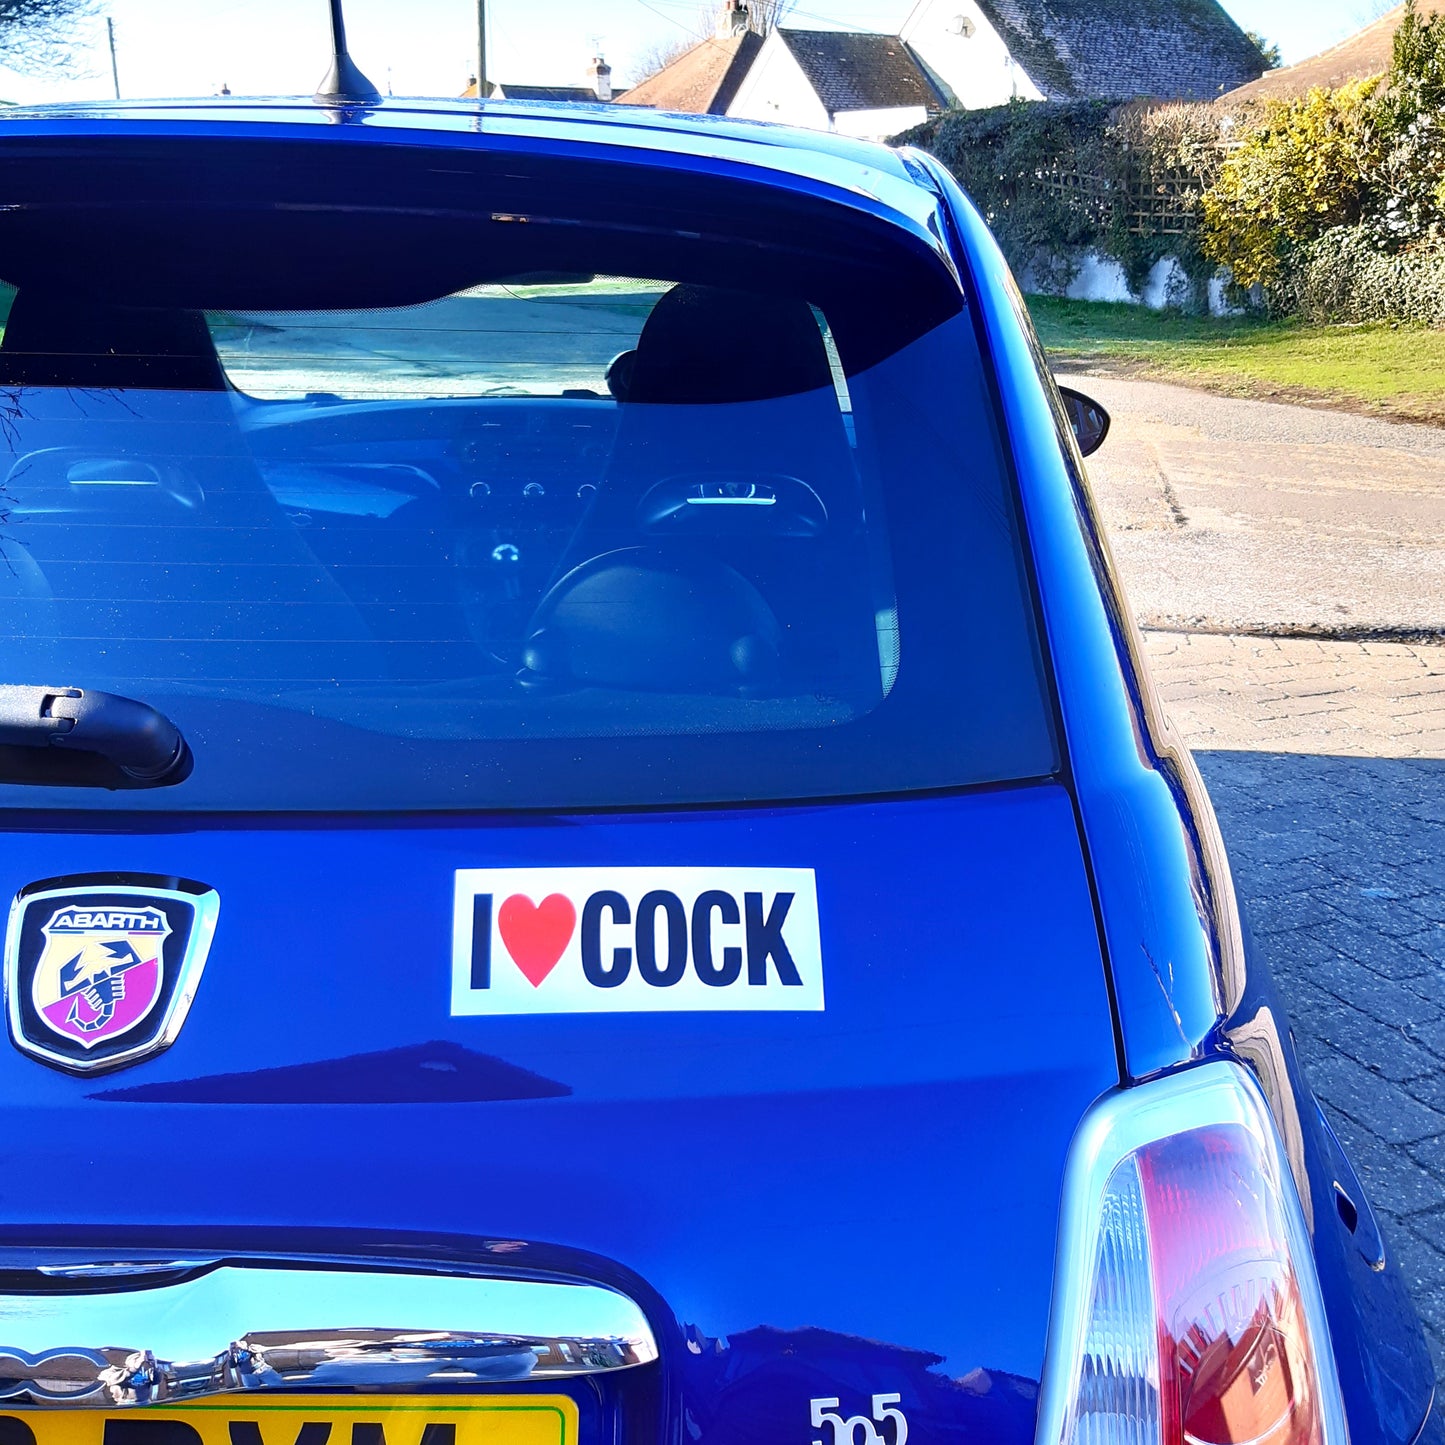 2 Joke Magnetic Car Stickers With "I LOVE COCK"